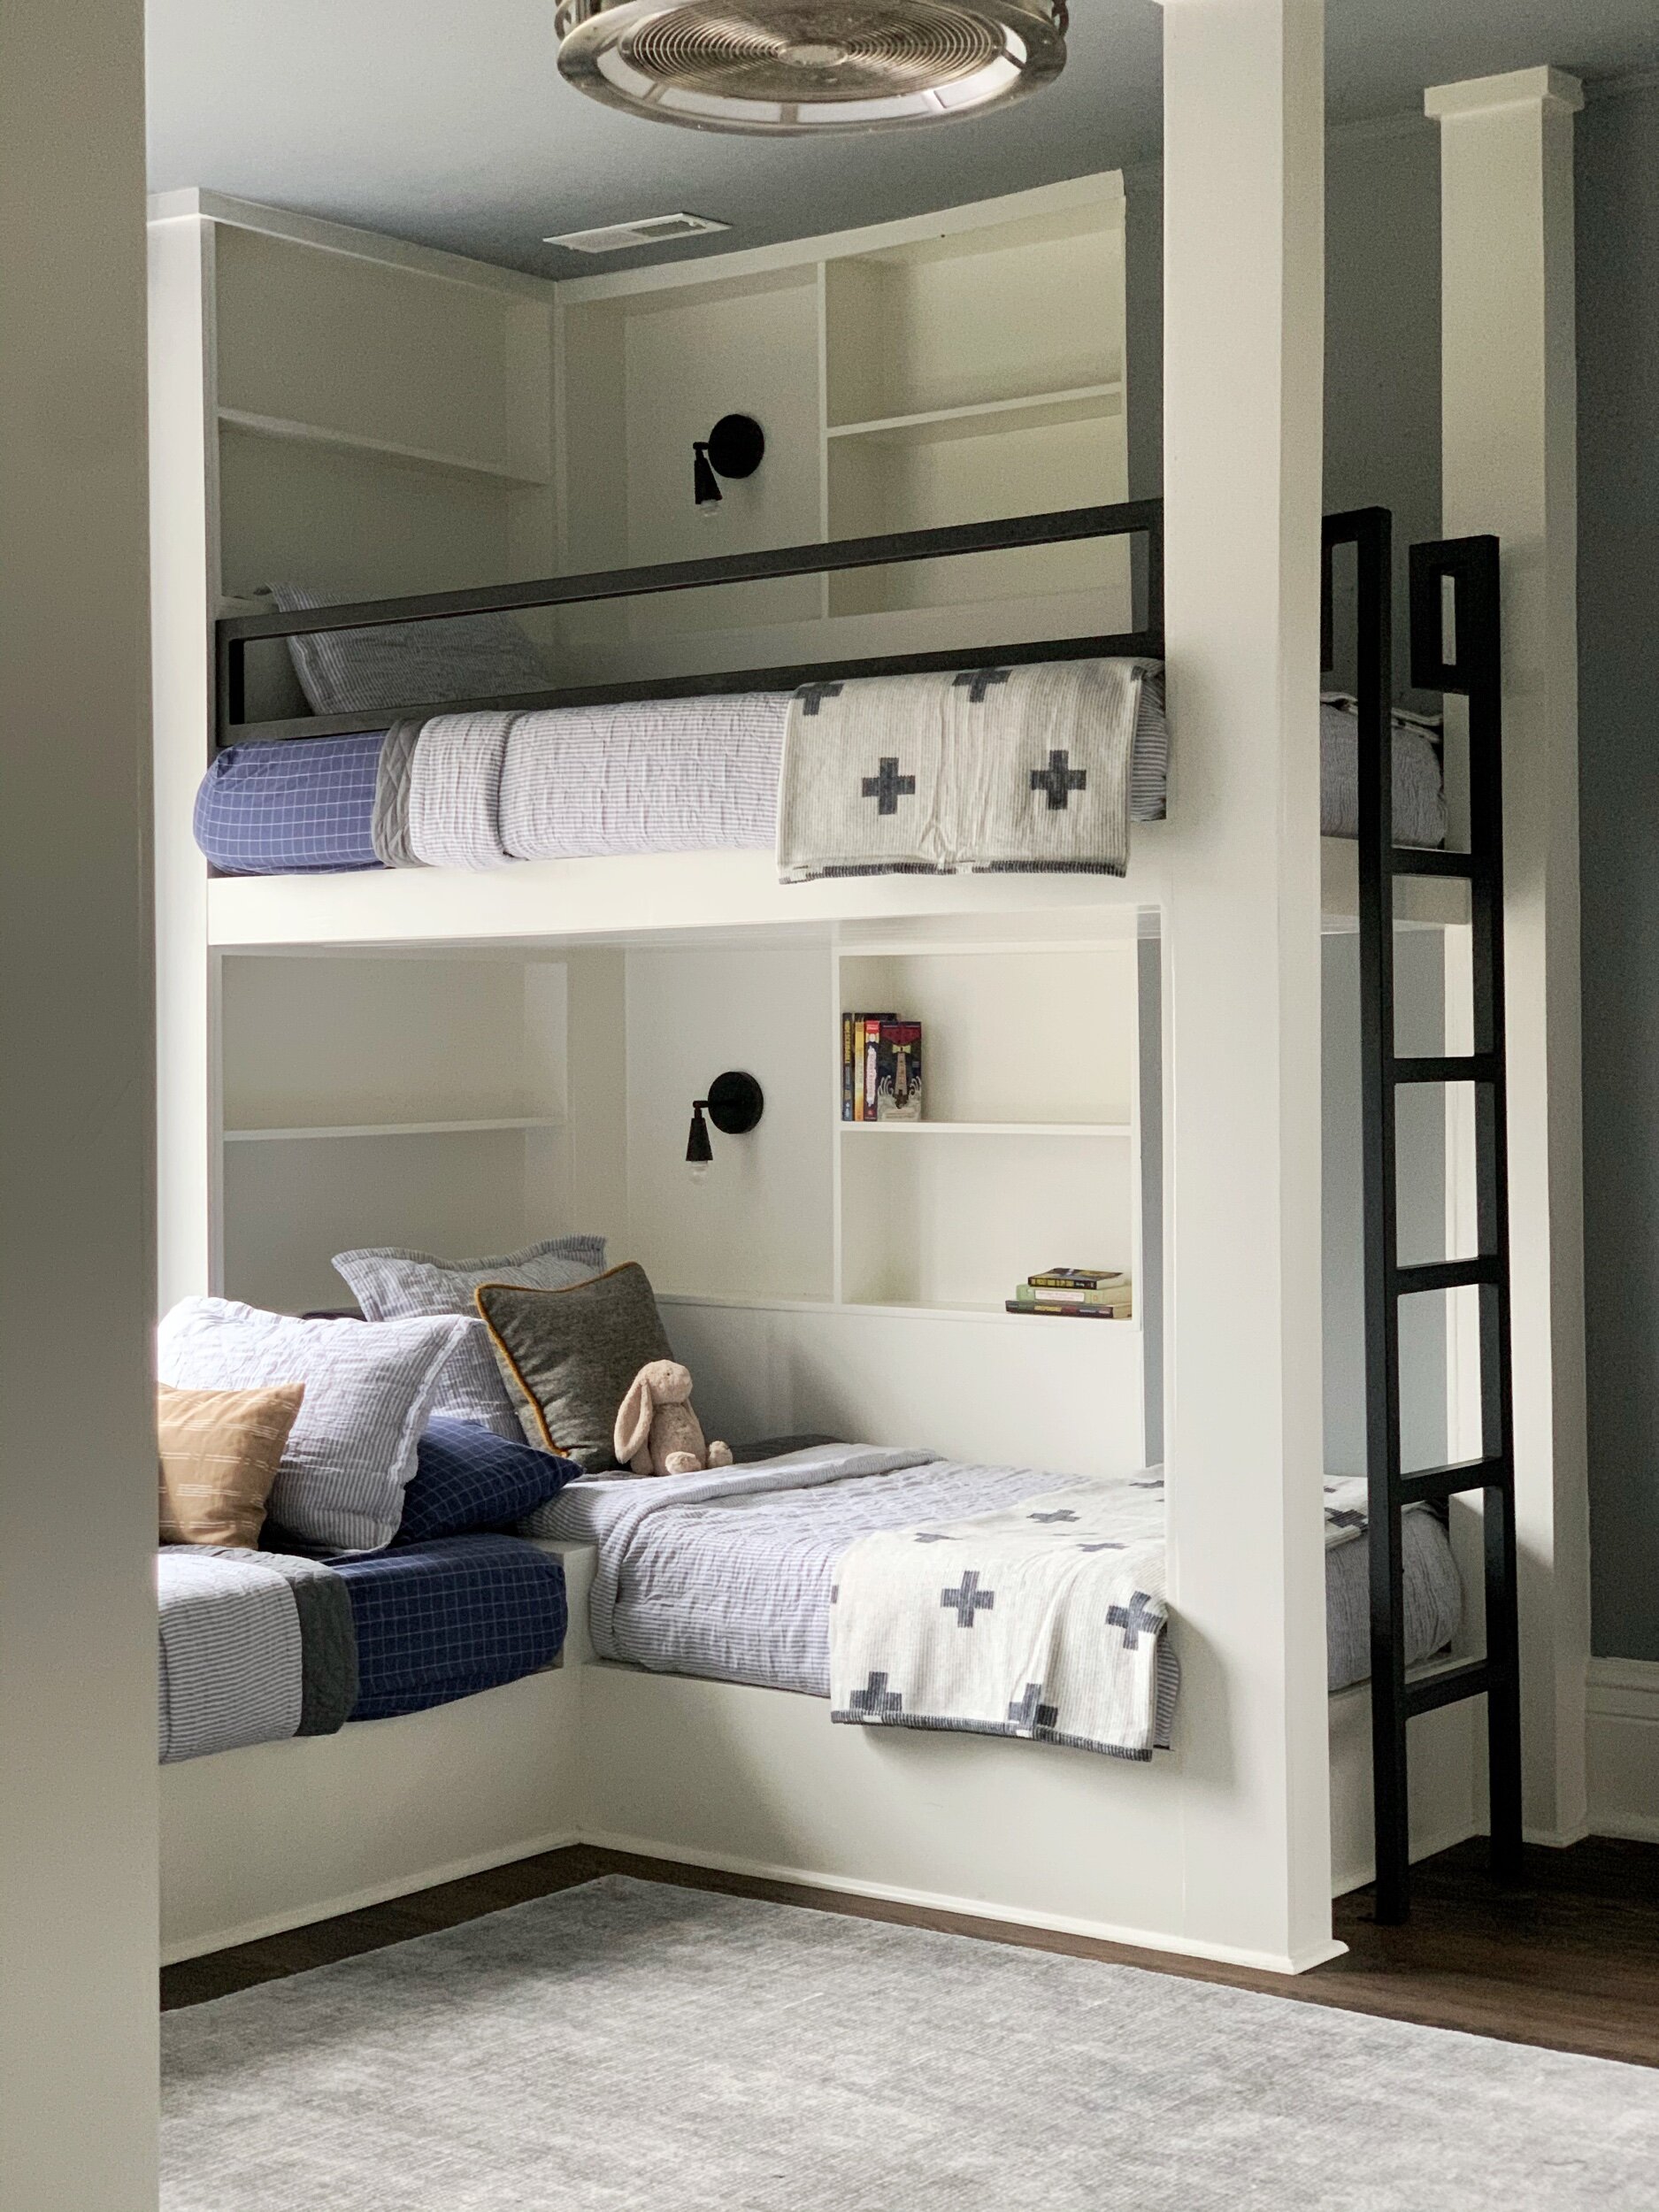 5 Bunk Beds For Boys 25 40 Love Co, 5 Bunk Beds